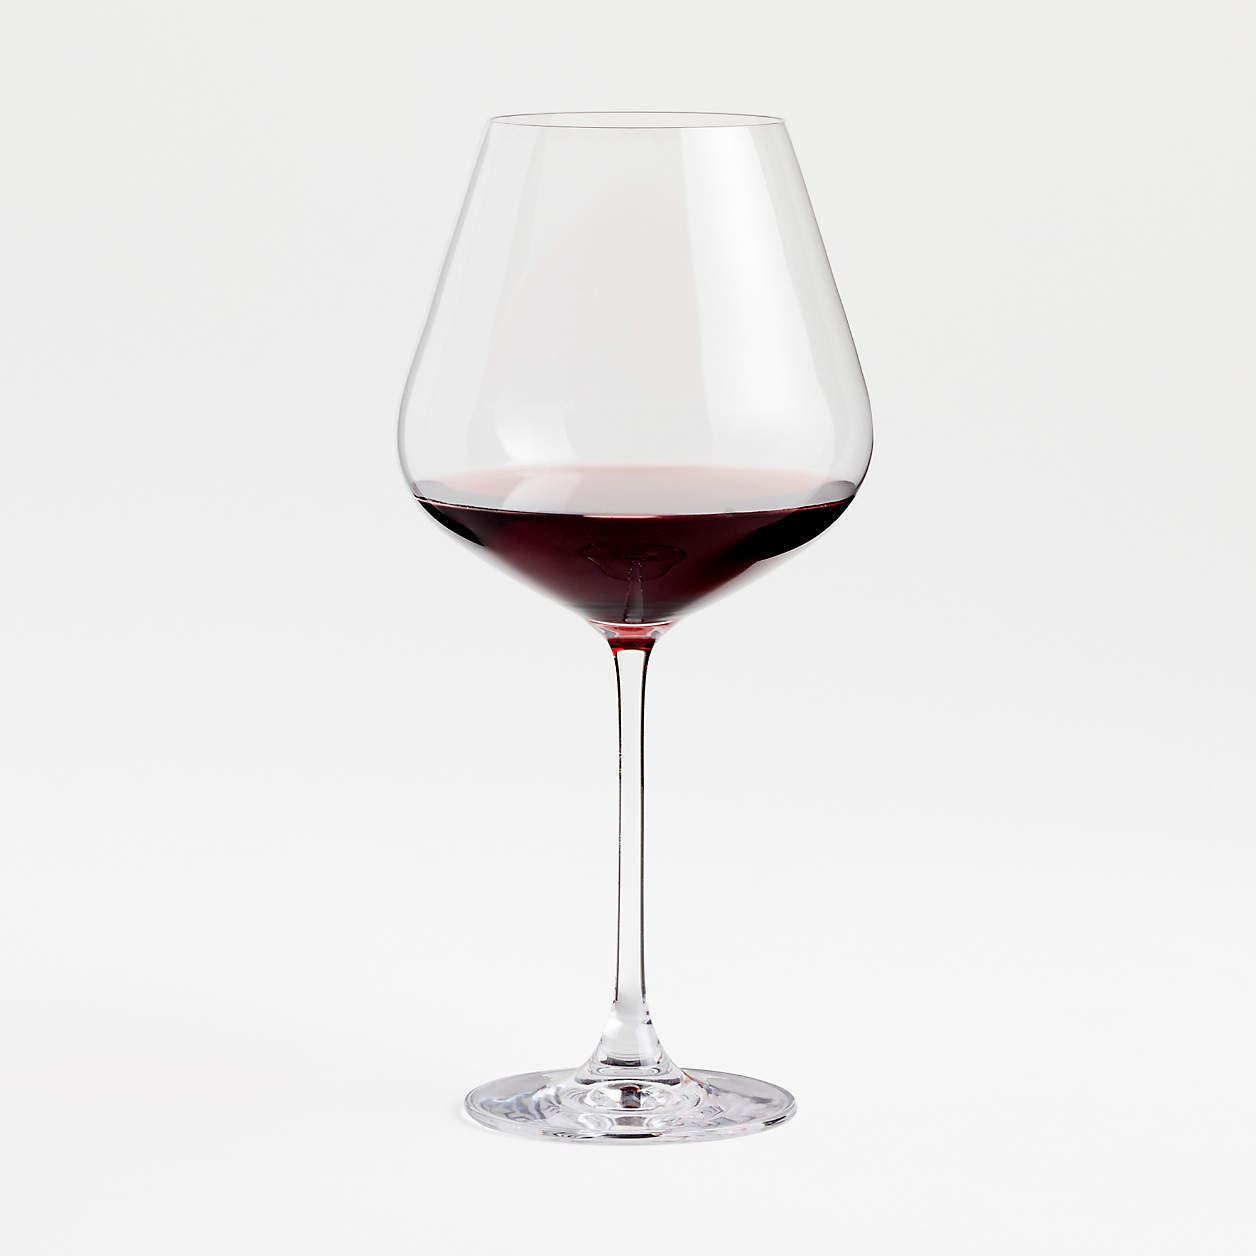 http://cdn.apartmenttherapy.info/image/upload/v1690318151/gen-workflow/product-database/hip-large-red-wine-glass.jpg